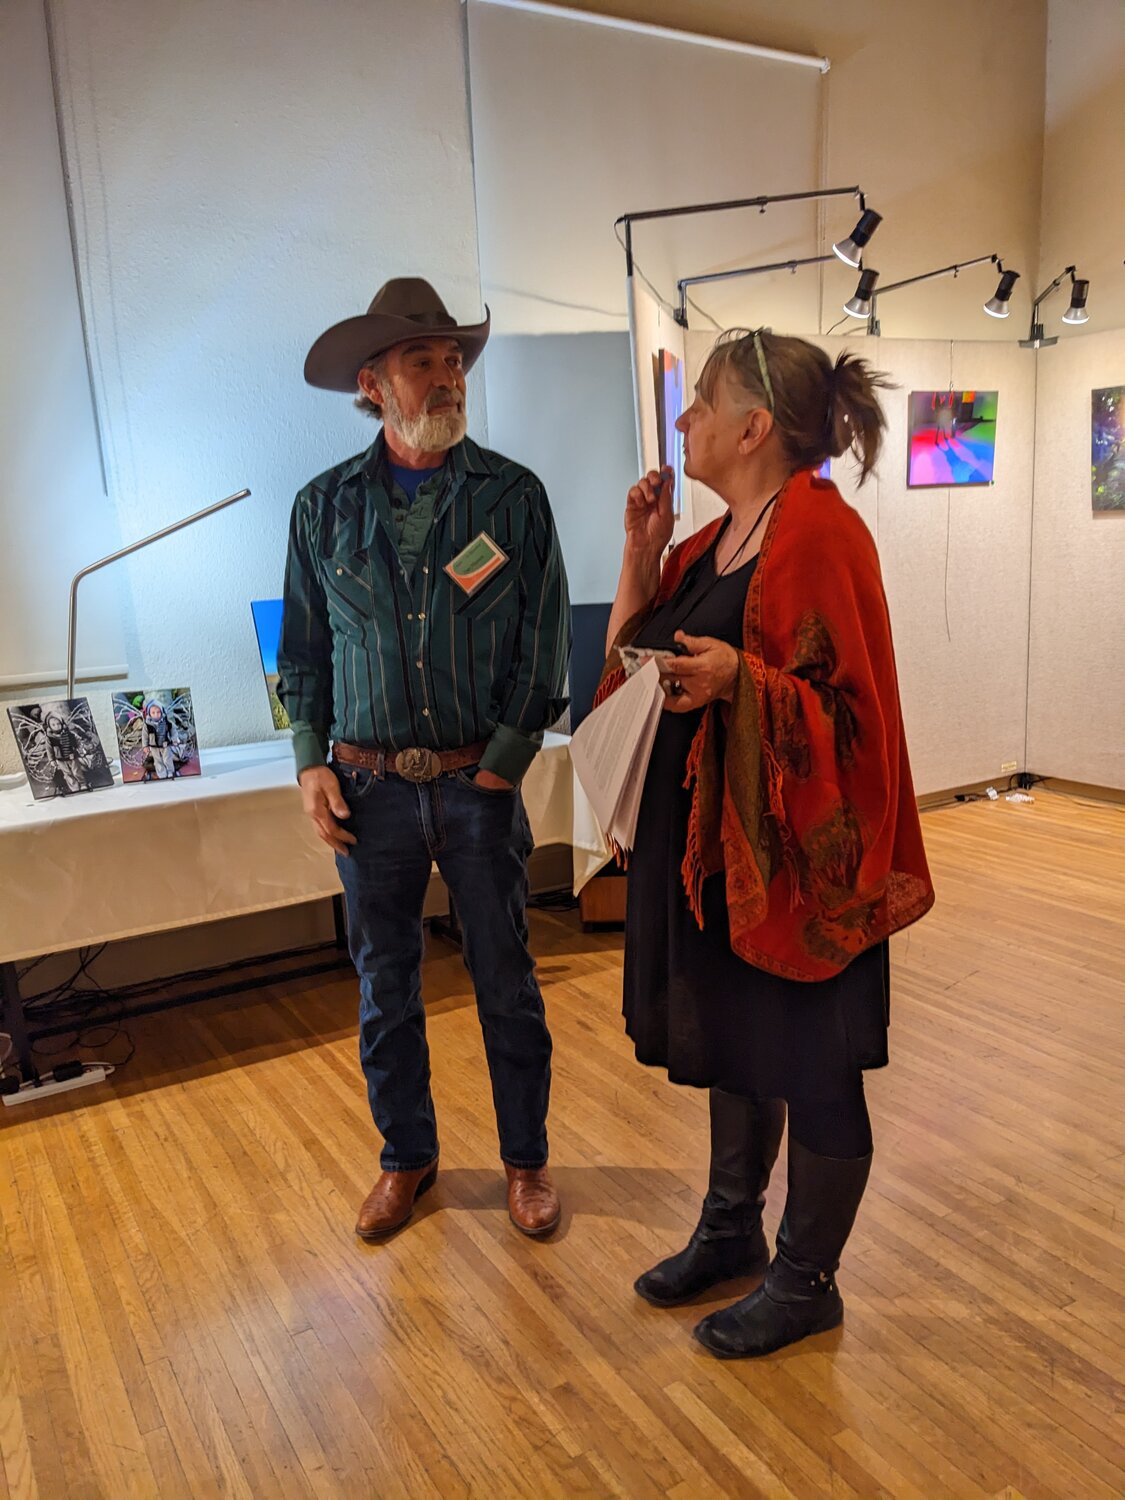 Artist Dan Pilgreen chats with photographer Rochelle Williams during the opening of her exhibition, “A Poet’s Eye: Accidental Beauties.”